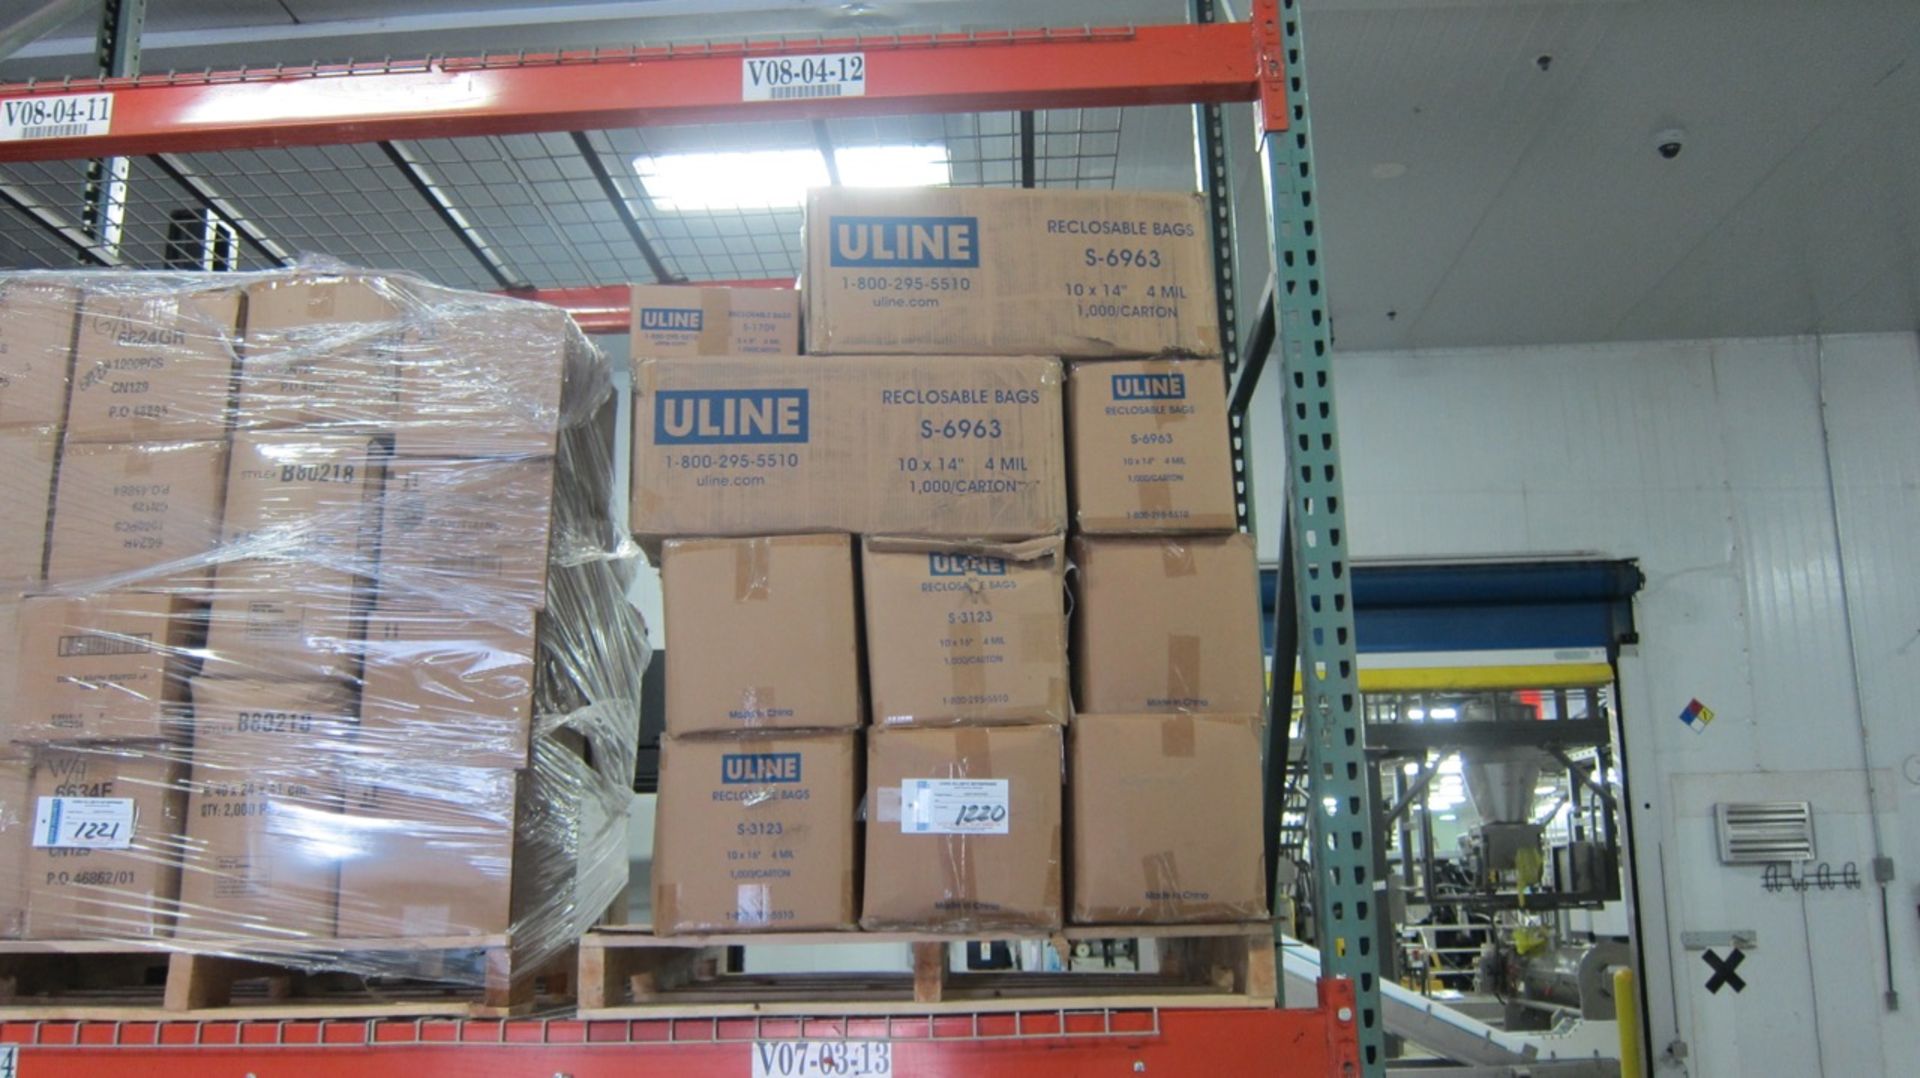 | One Lot One (1) pallet U-line reclosable bags 10"x16", 4mil and trash liners | MODEL# | SERIAL# |